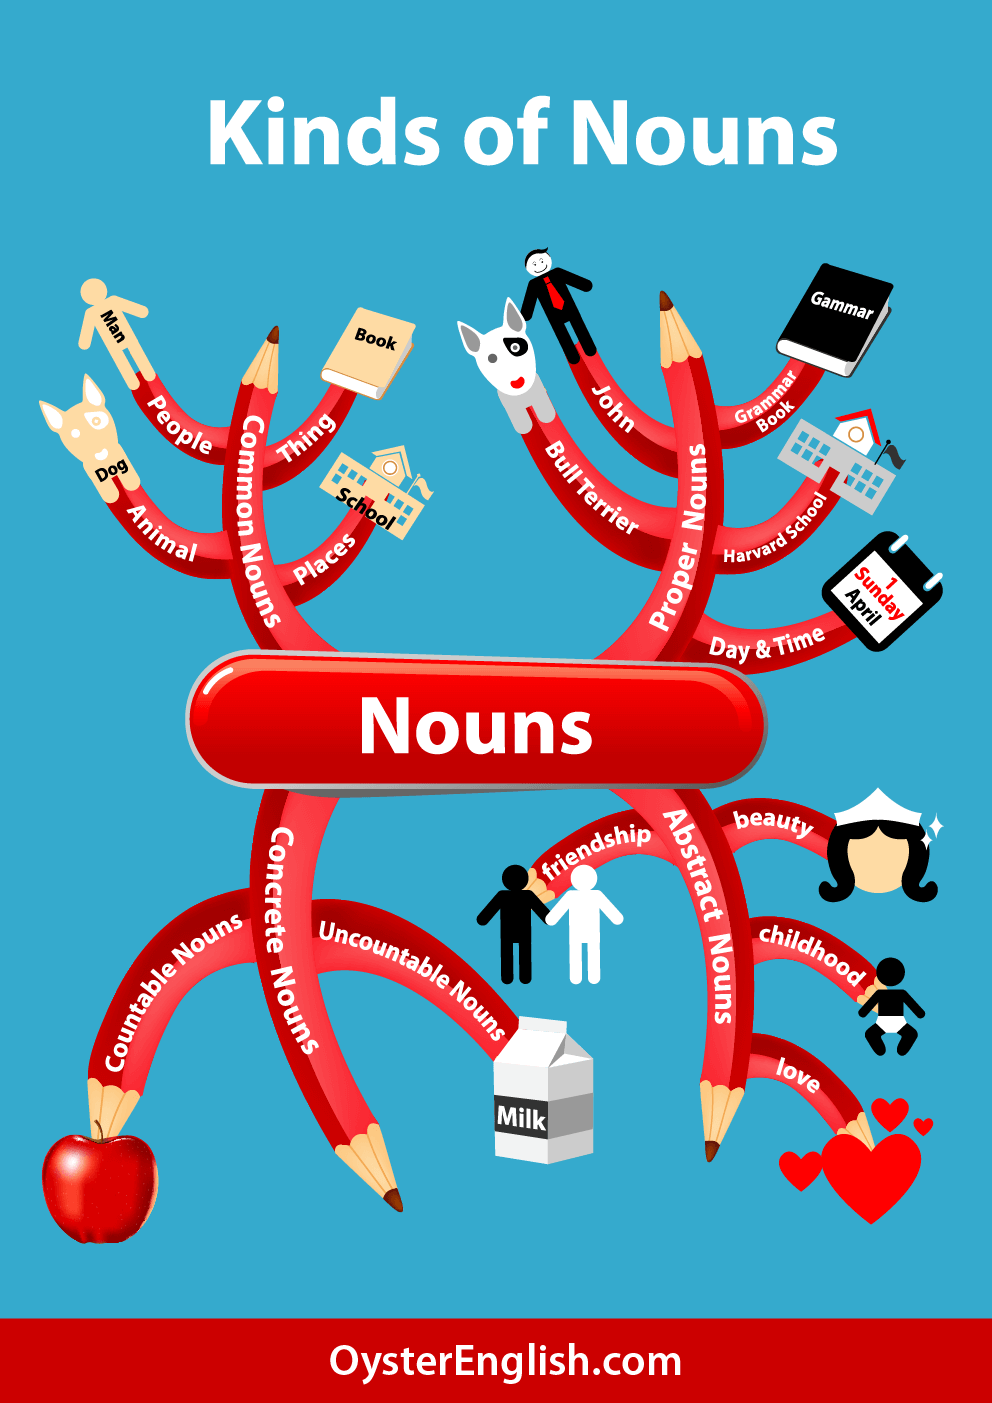 Visual representation of a Swiss Army knife with different "tools" depicted as the different types of nouns.